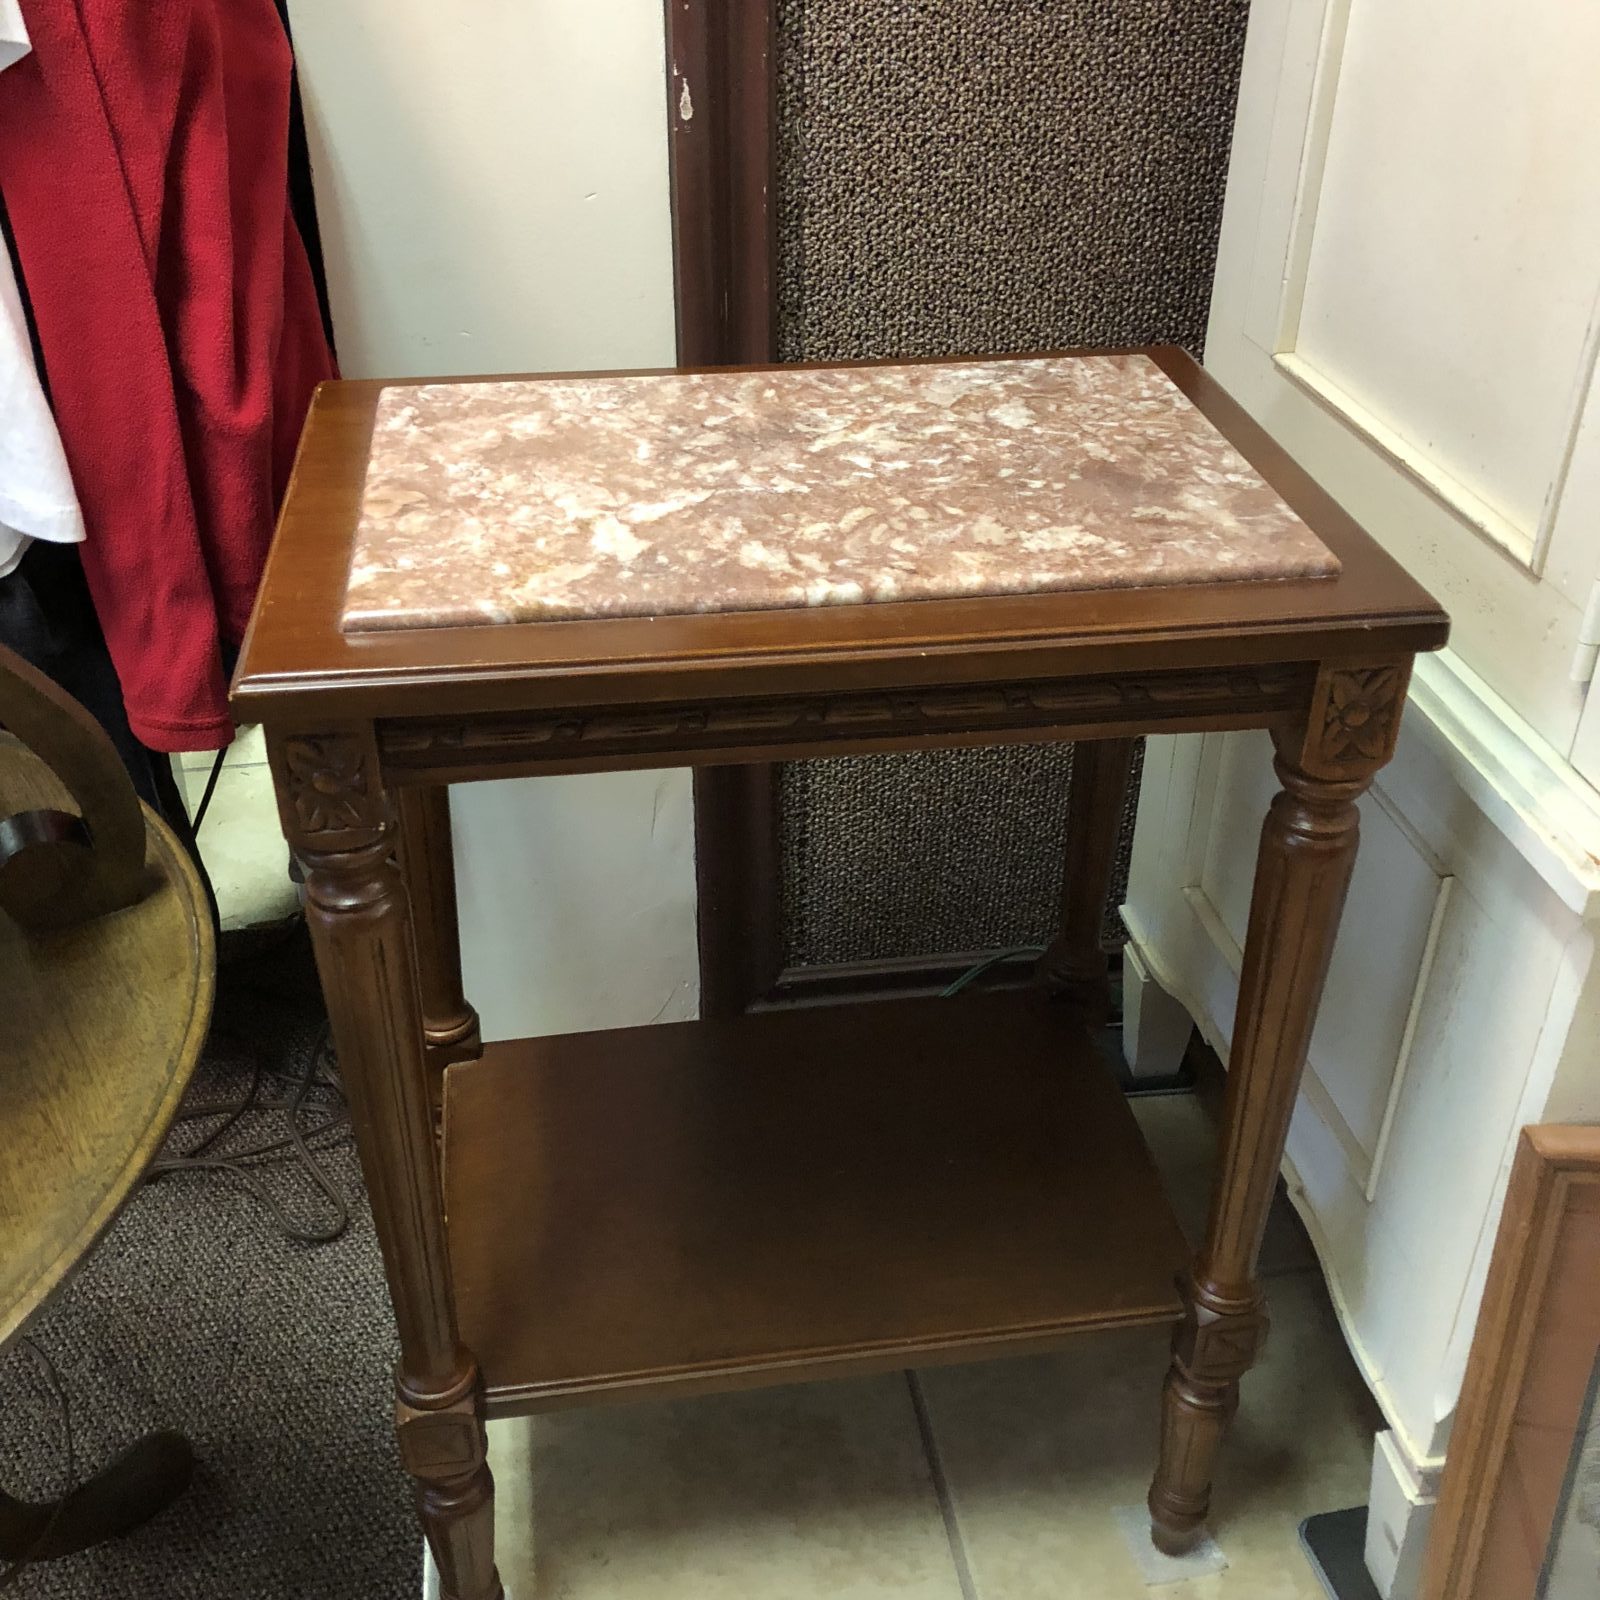 Vintage Marble Top Tables • Pair of Vintage Marble Insert Side Tables in excellent condition.